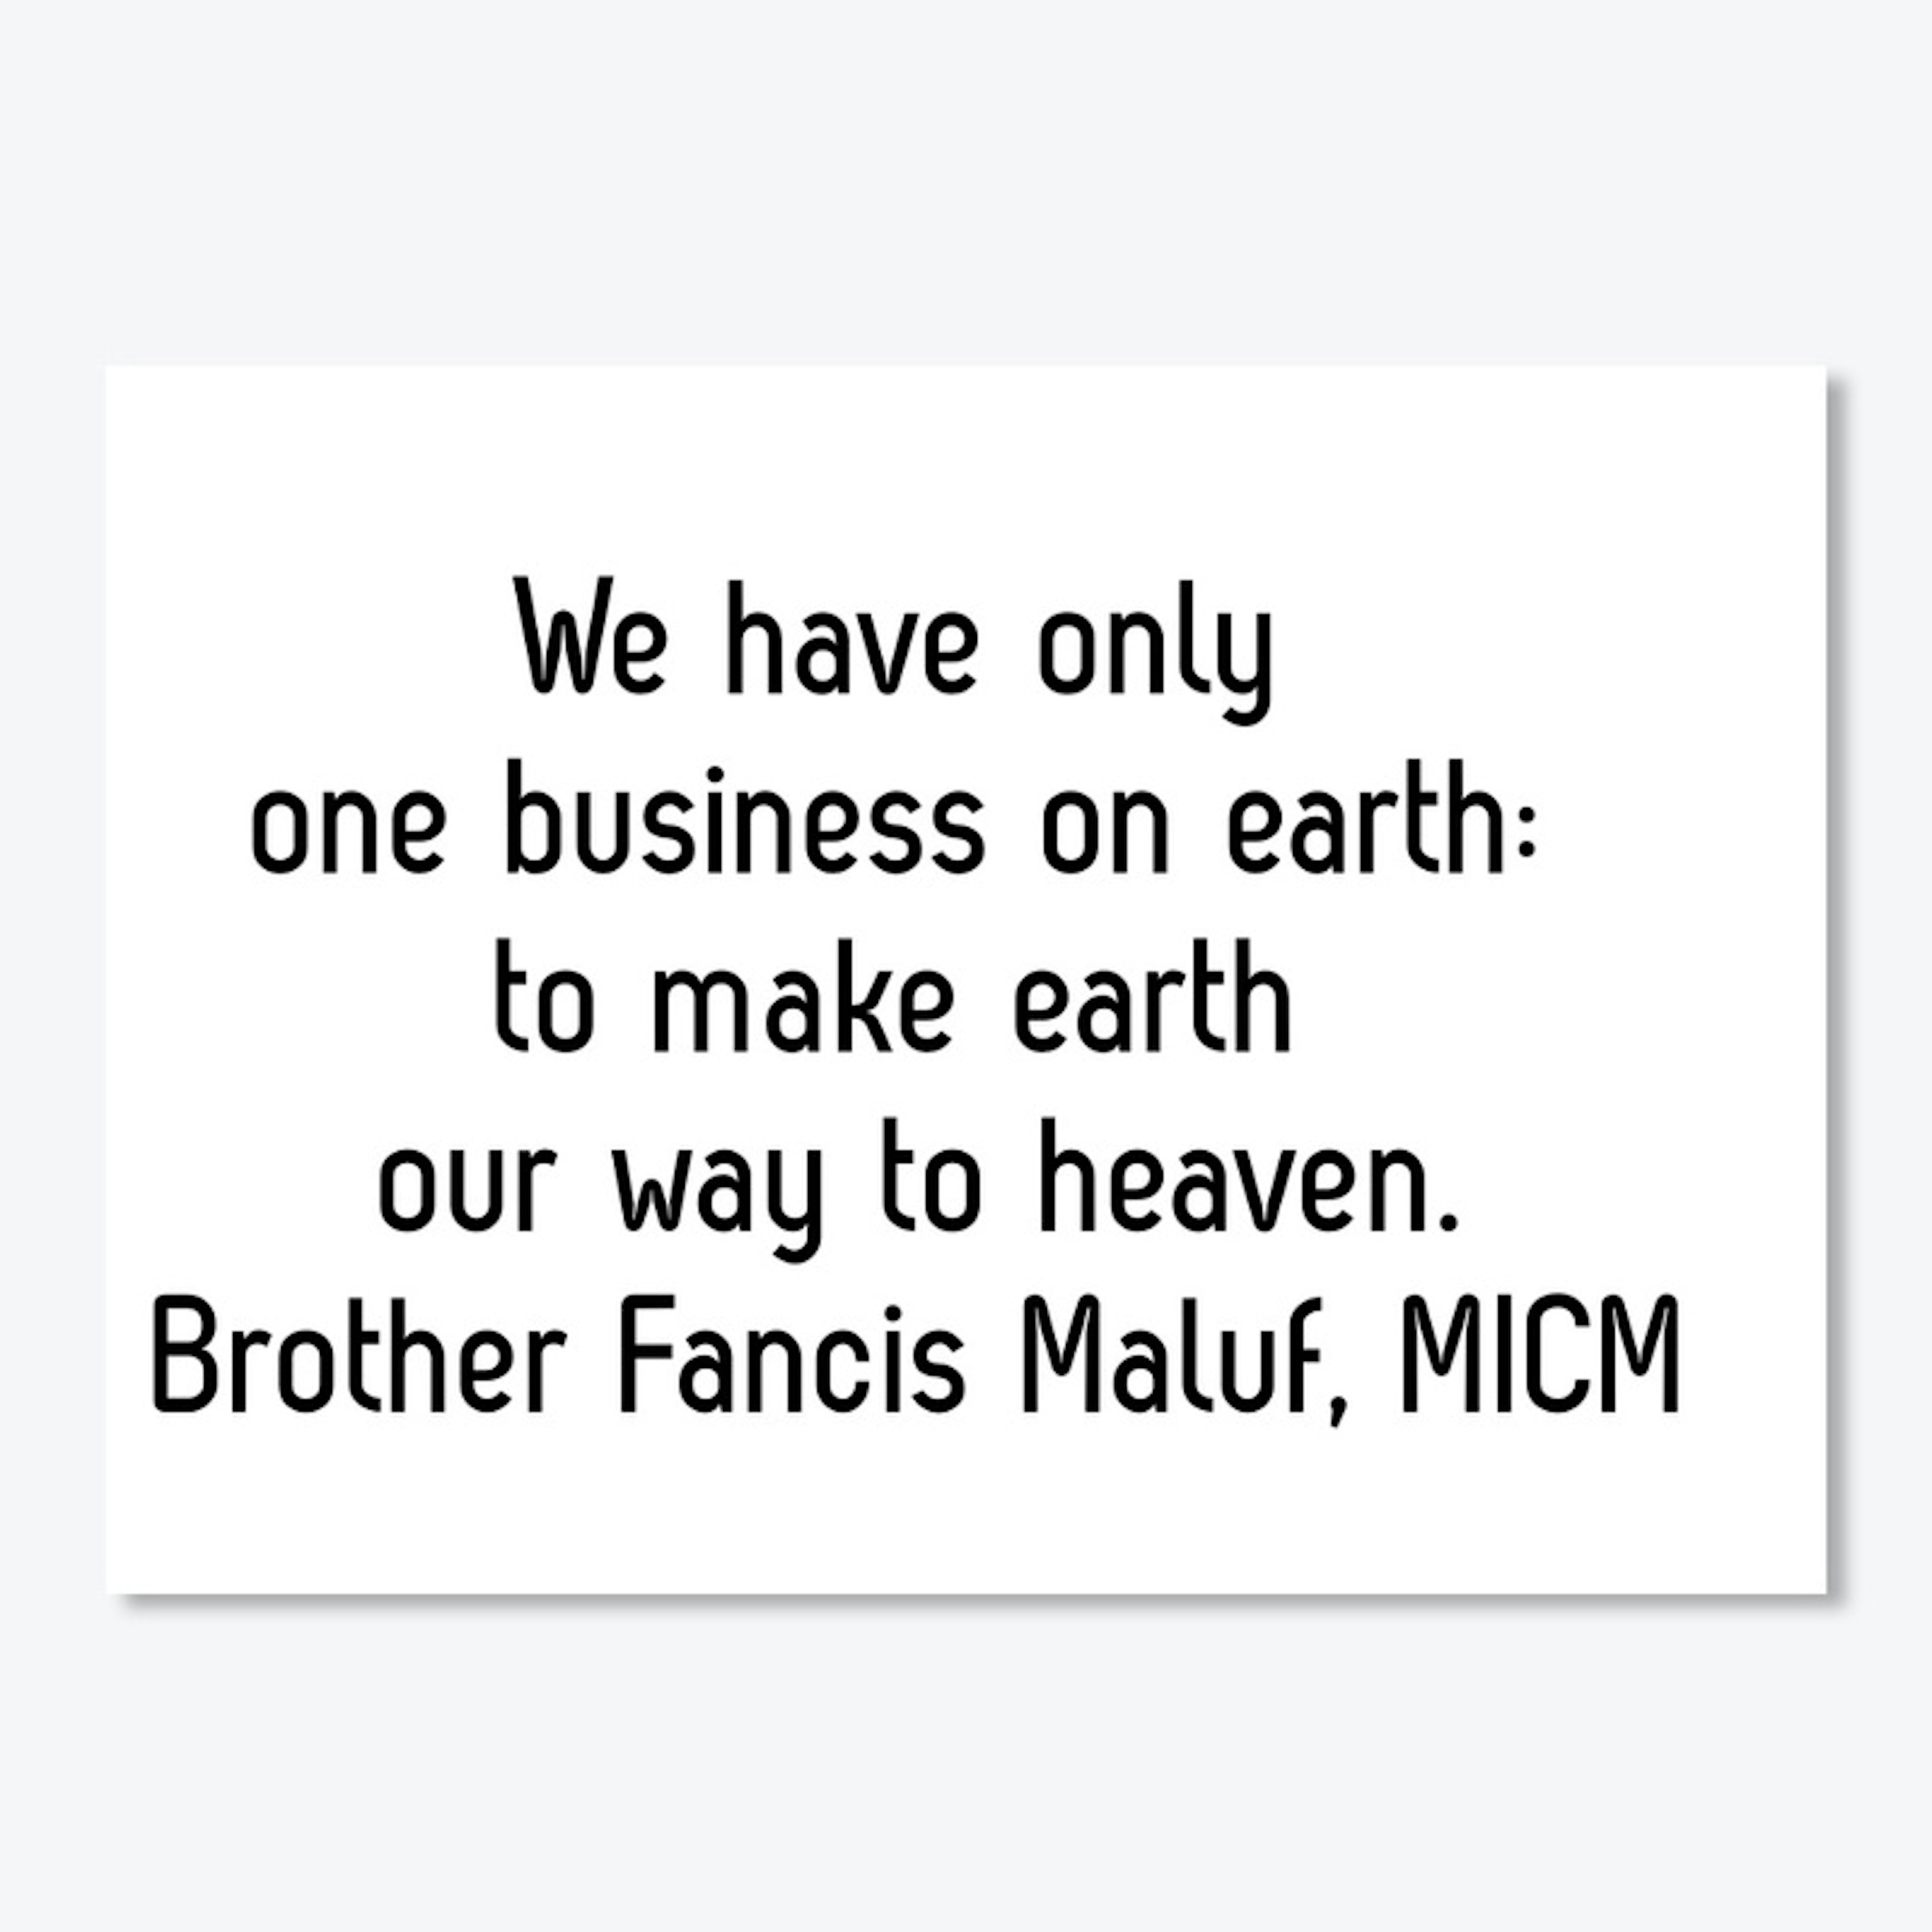 To make earth our way to heaven